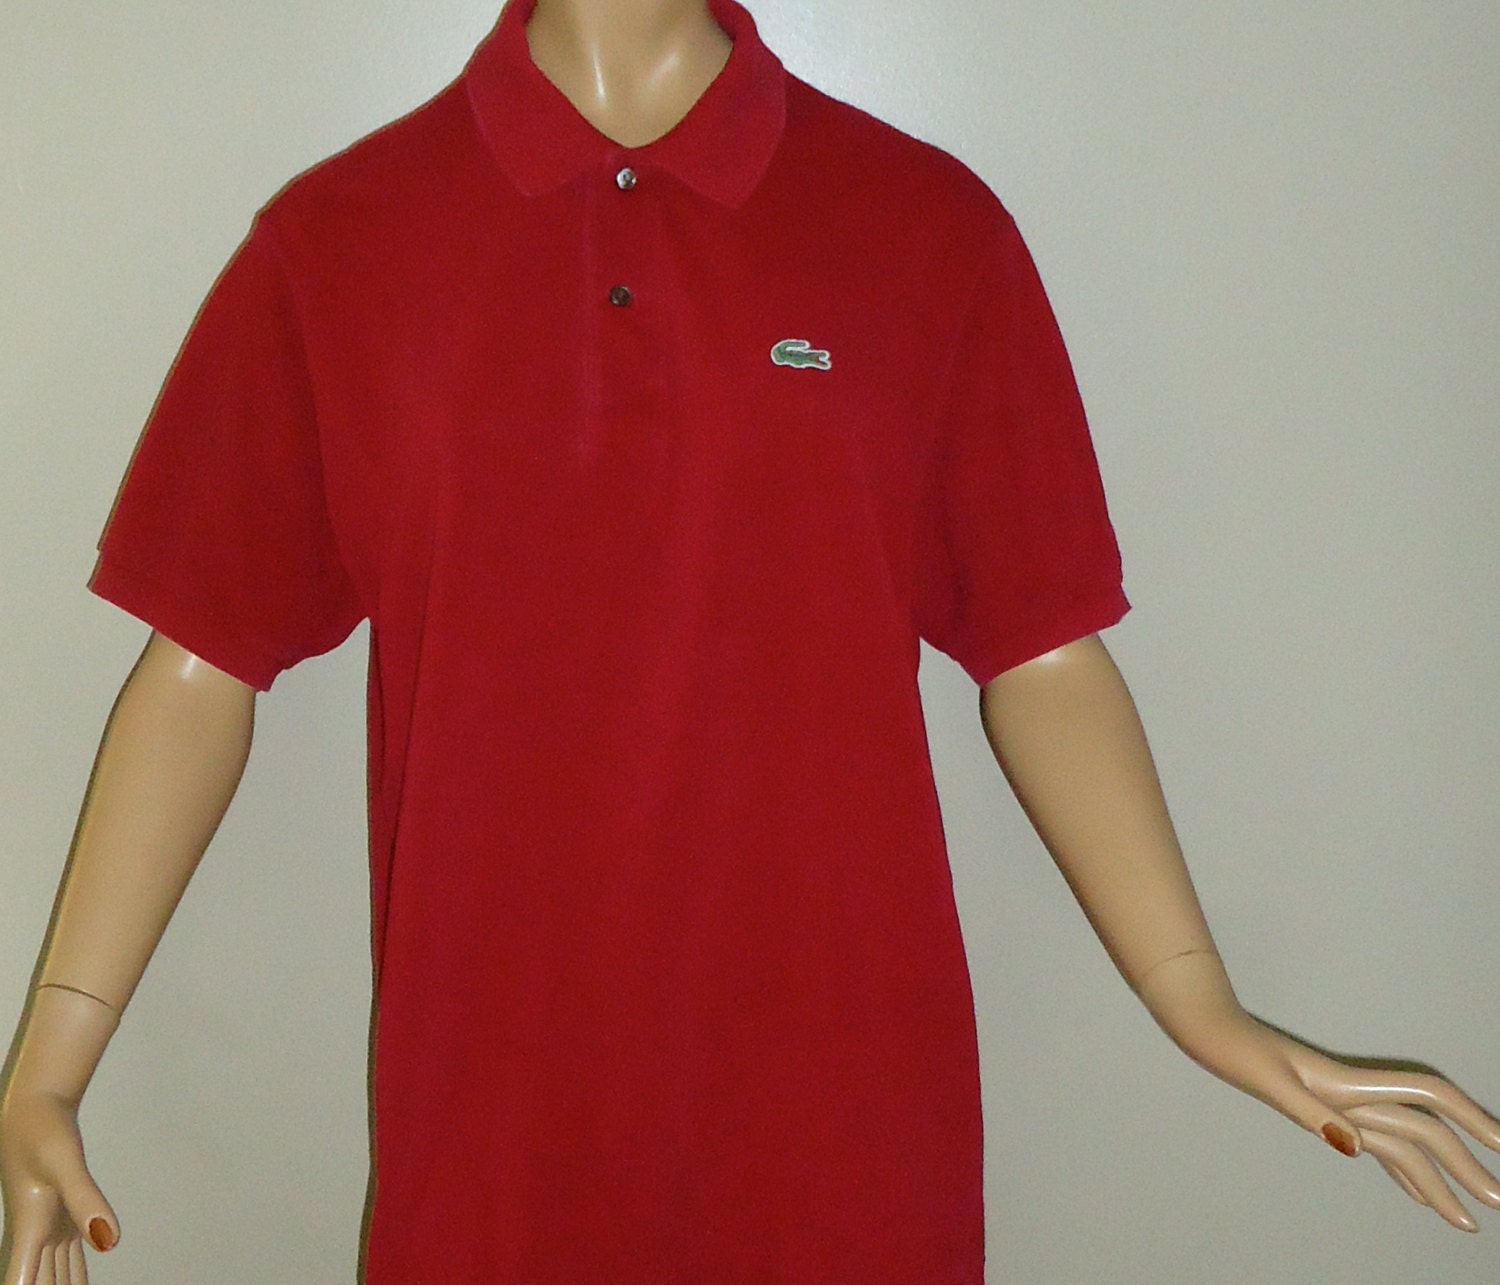 70s Burgundy Vintage Lacoste Polo Unisex Golf Shirt by thineintime